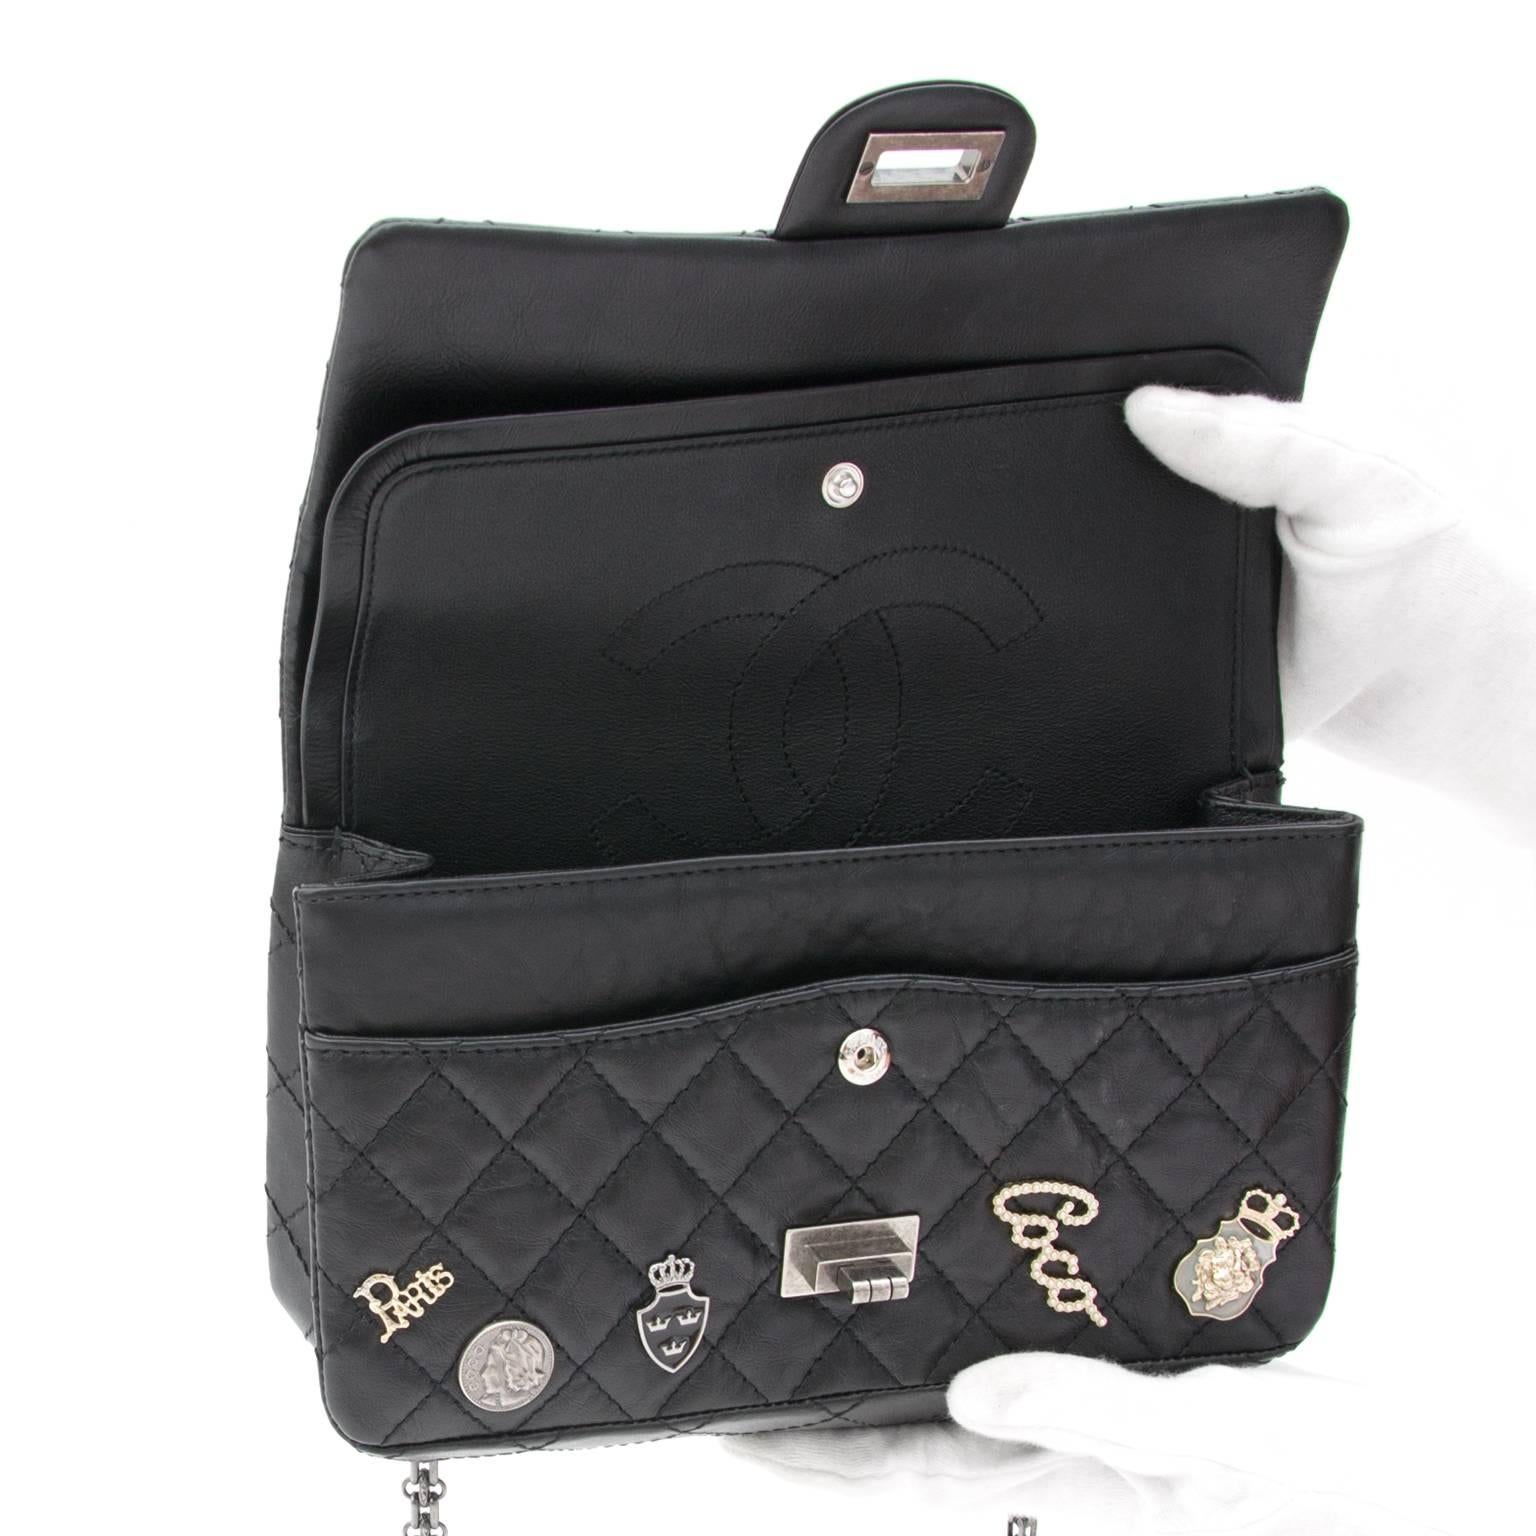 A real collector’s piece this Rare Chanel Lucky Charm 2.55 Reissue double flap bag in size 225.

The bag features 20 cute and meaningful iconic Chanel charms such as a turtle, camelia, number 5, four leaf clover,..
Front flap with Mademoiselle